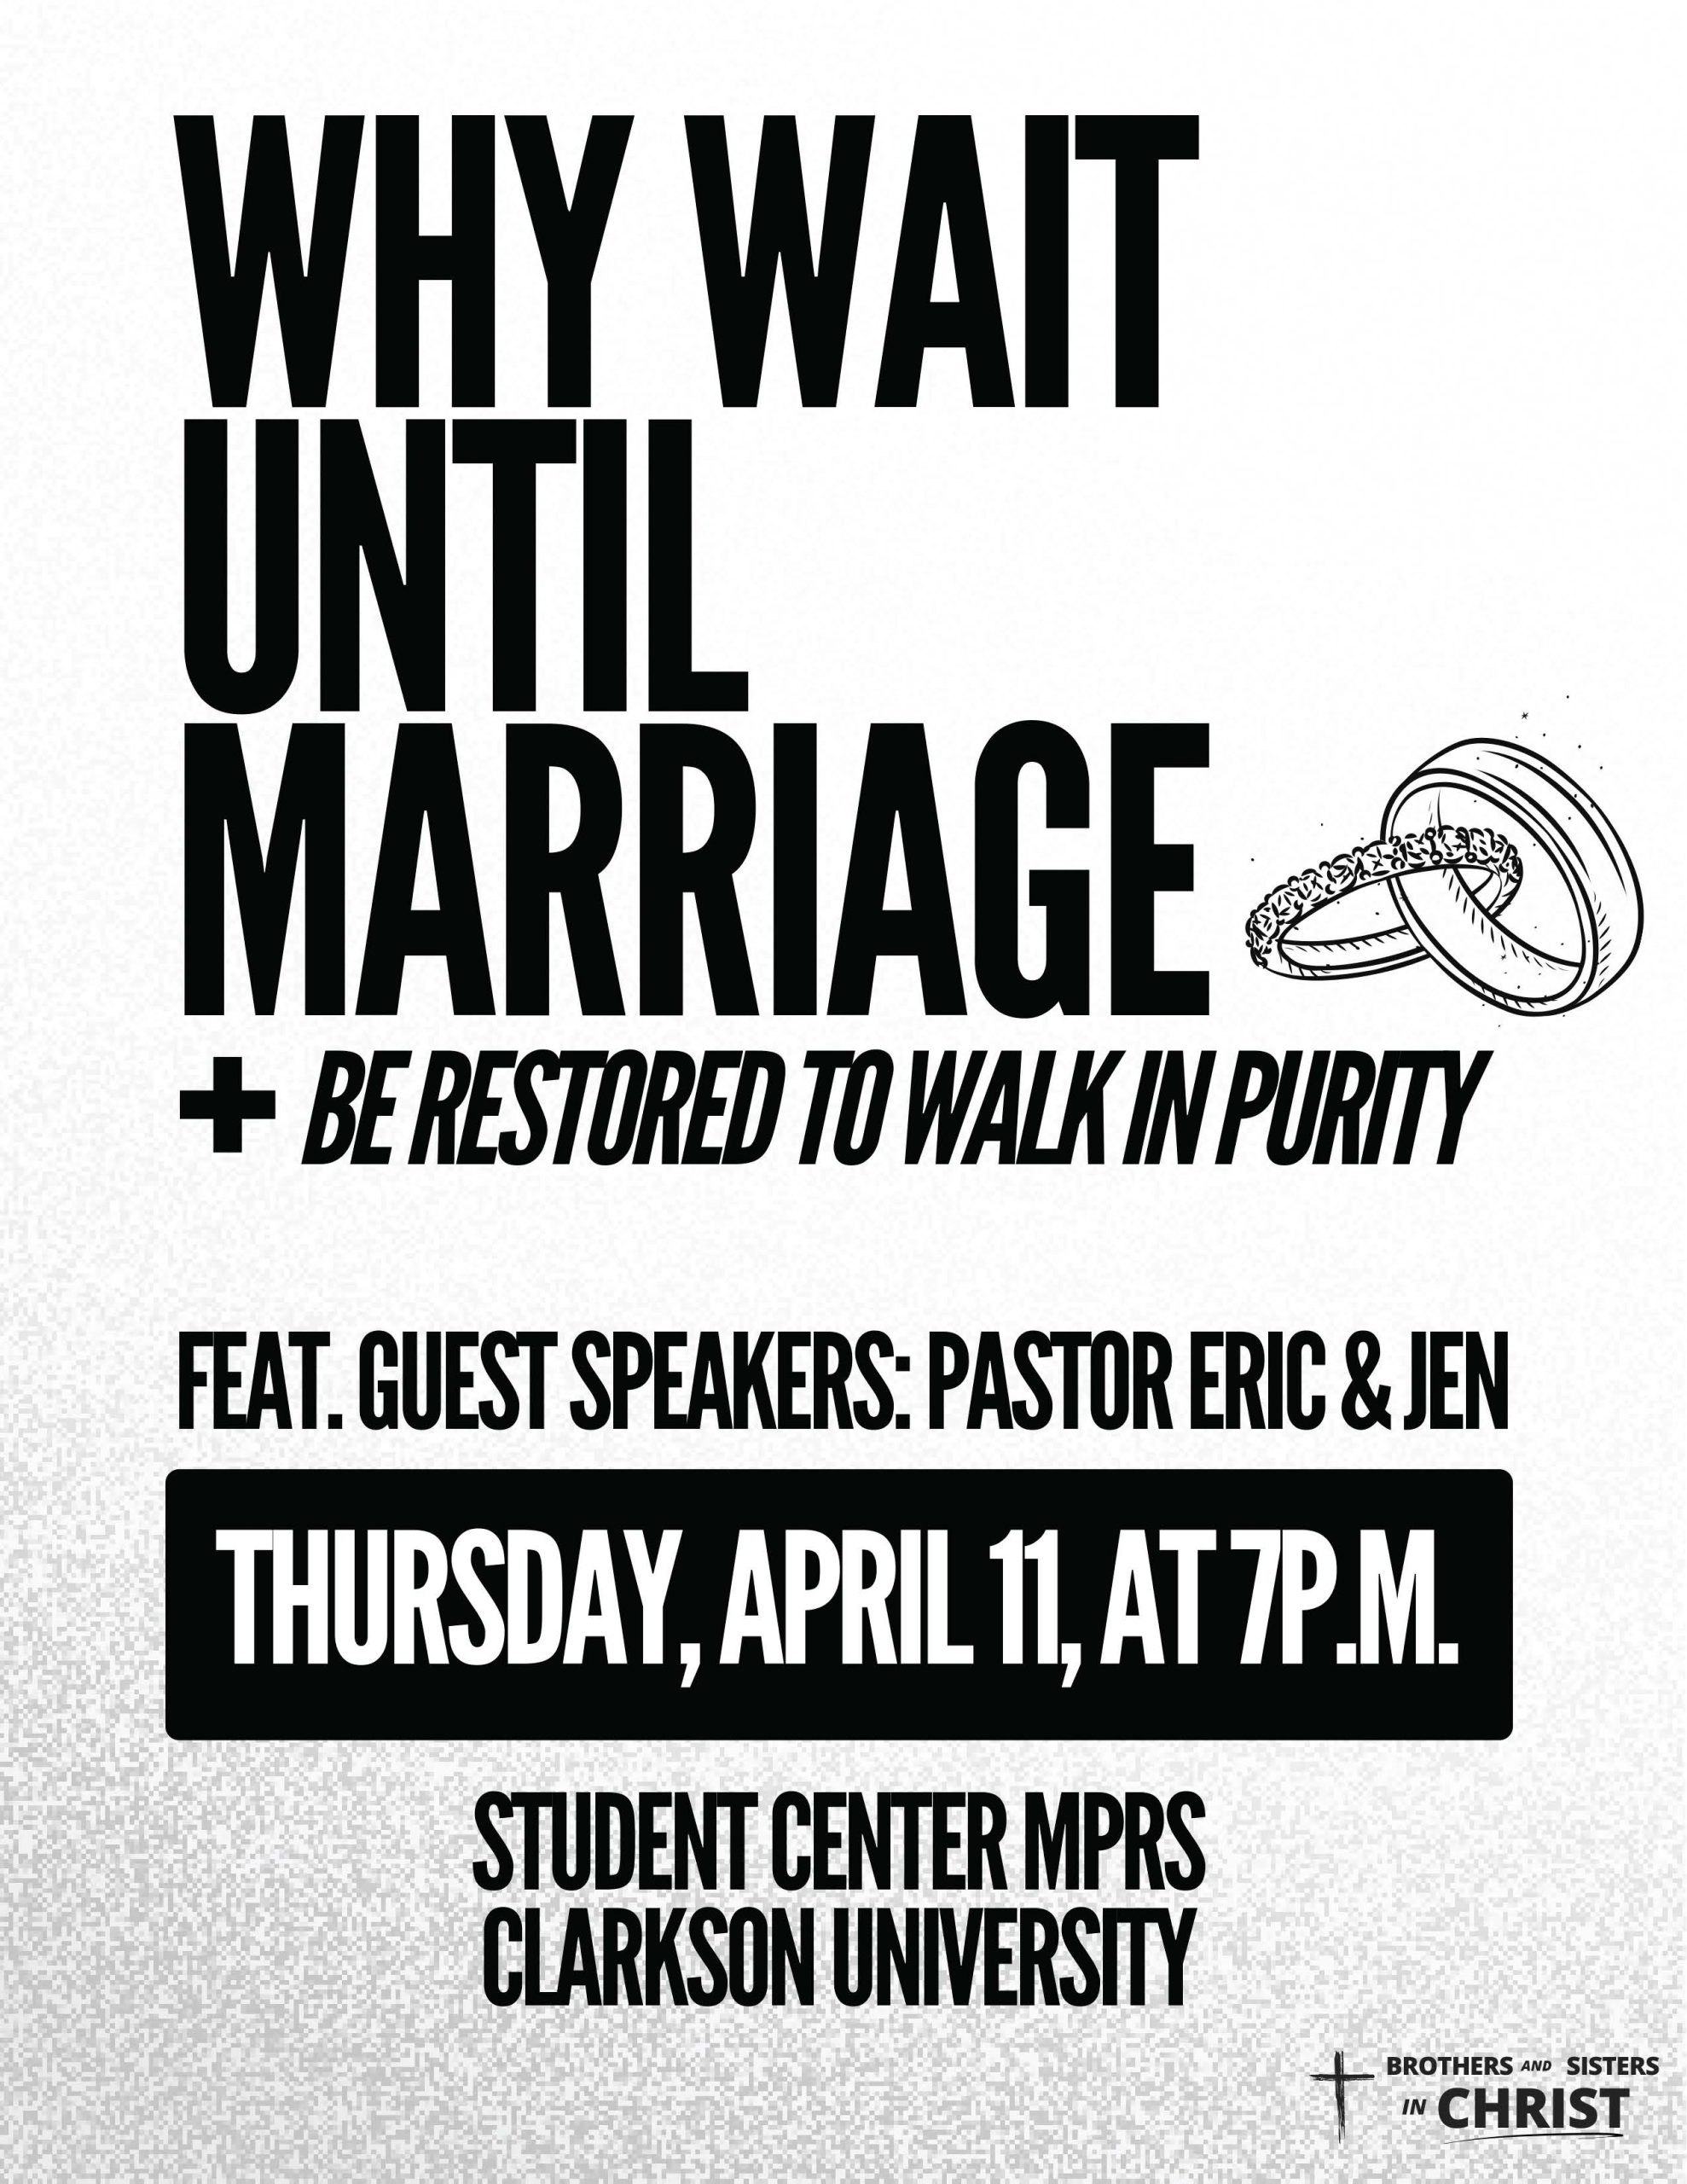 Why Wait Until Marriage + Be Restored to Walk in Purity